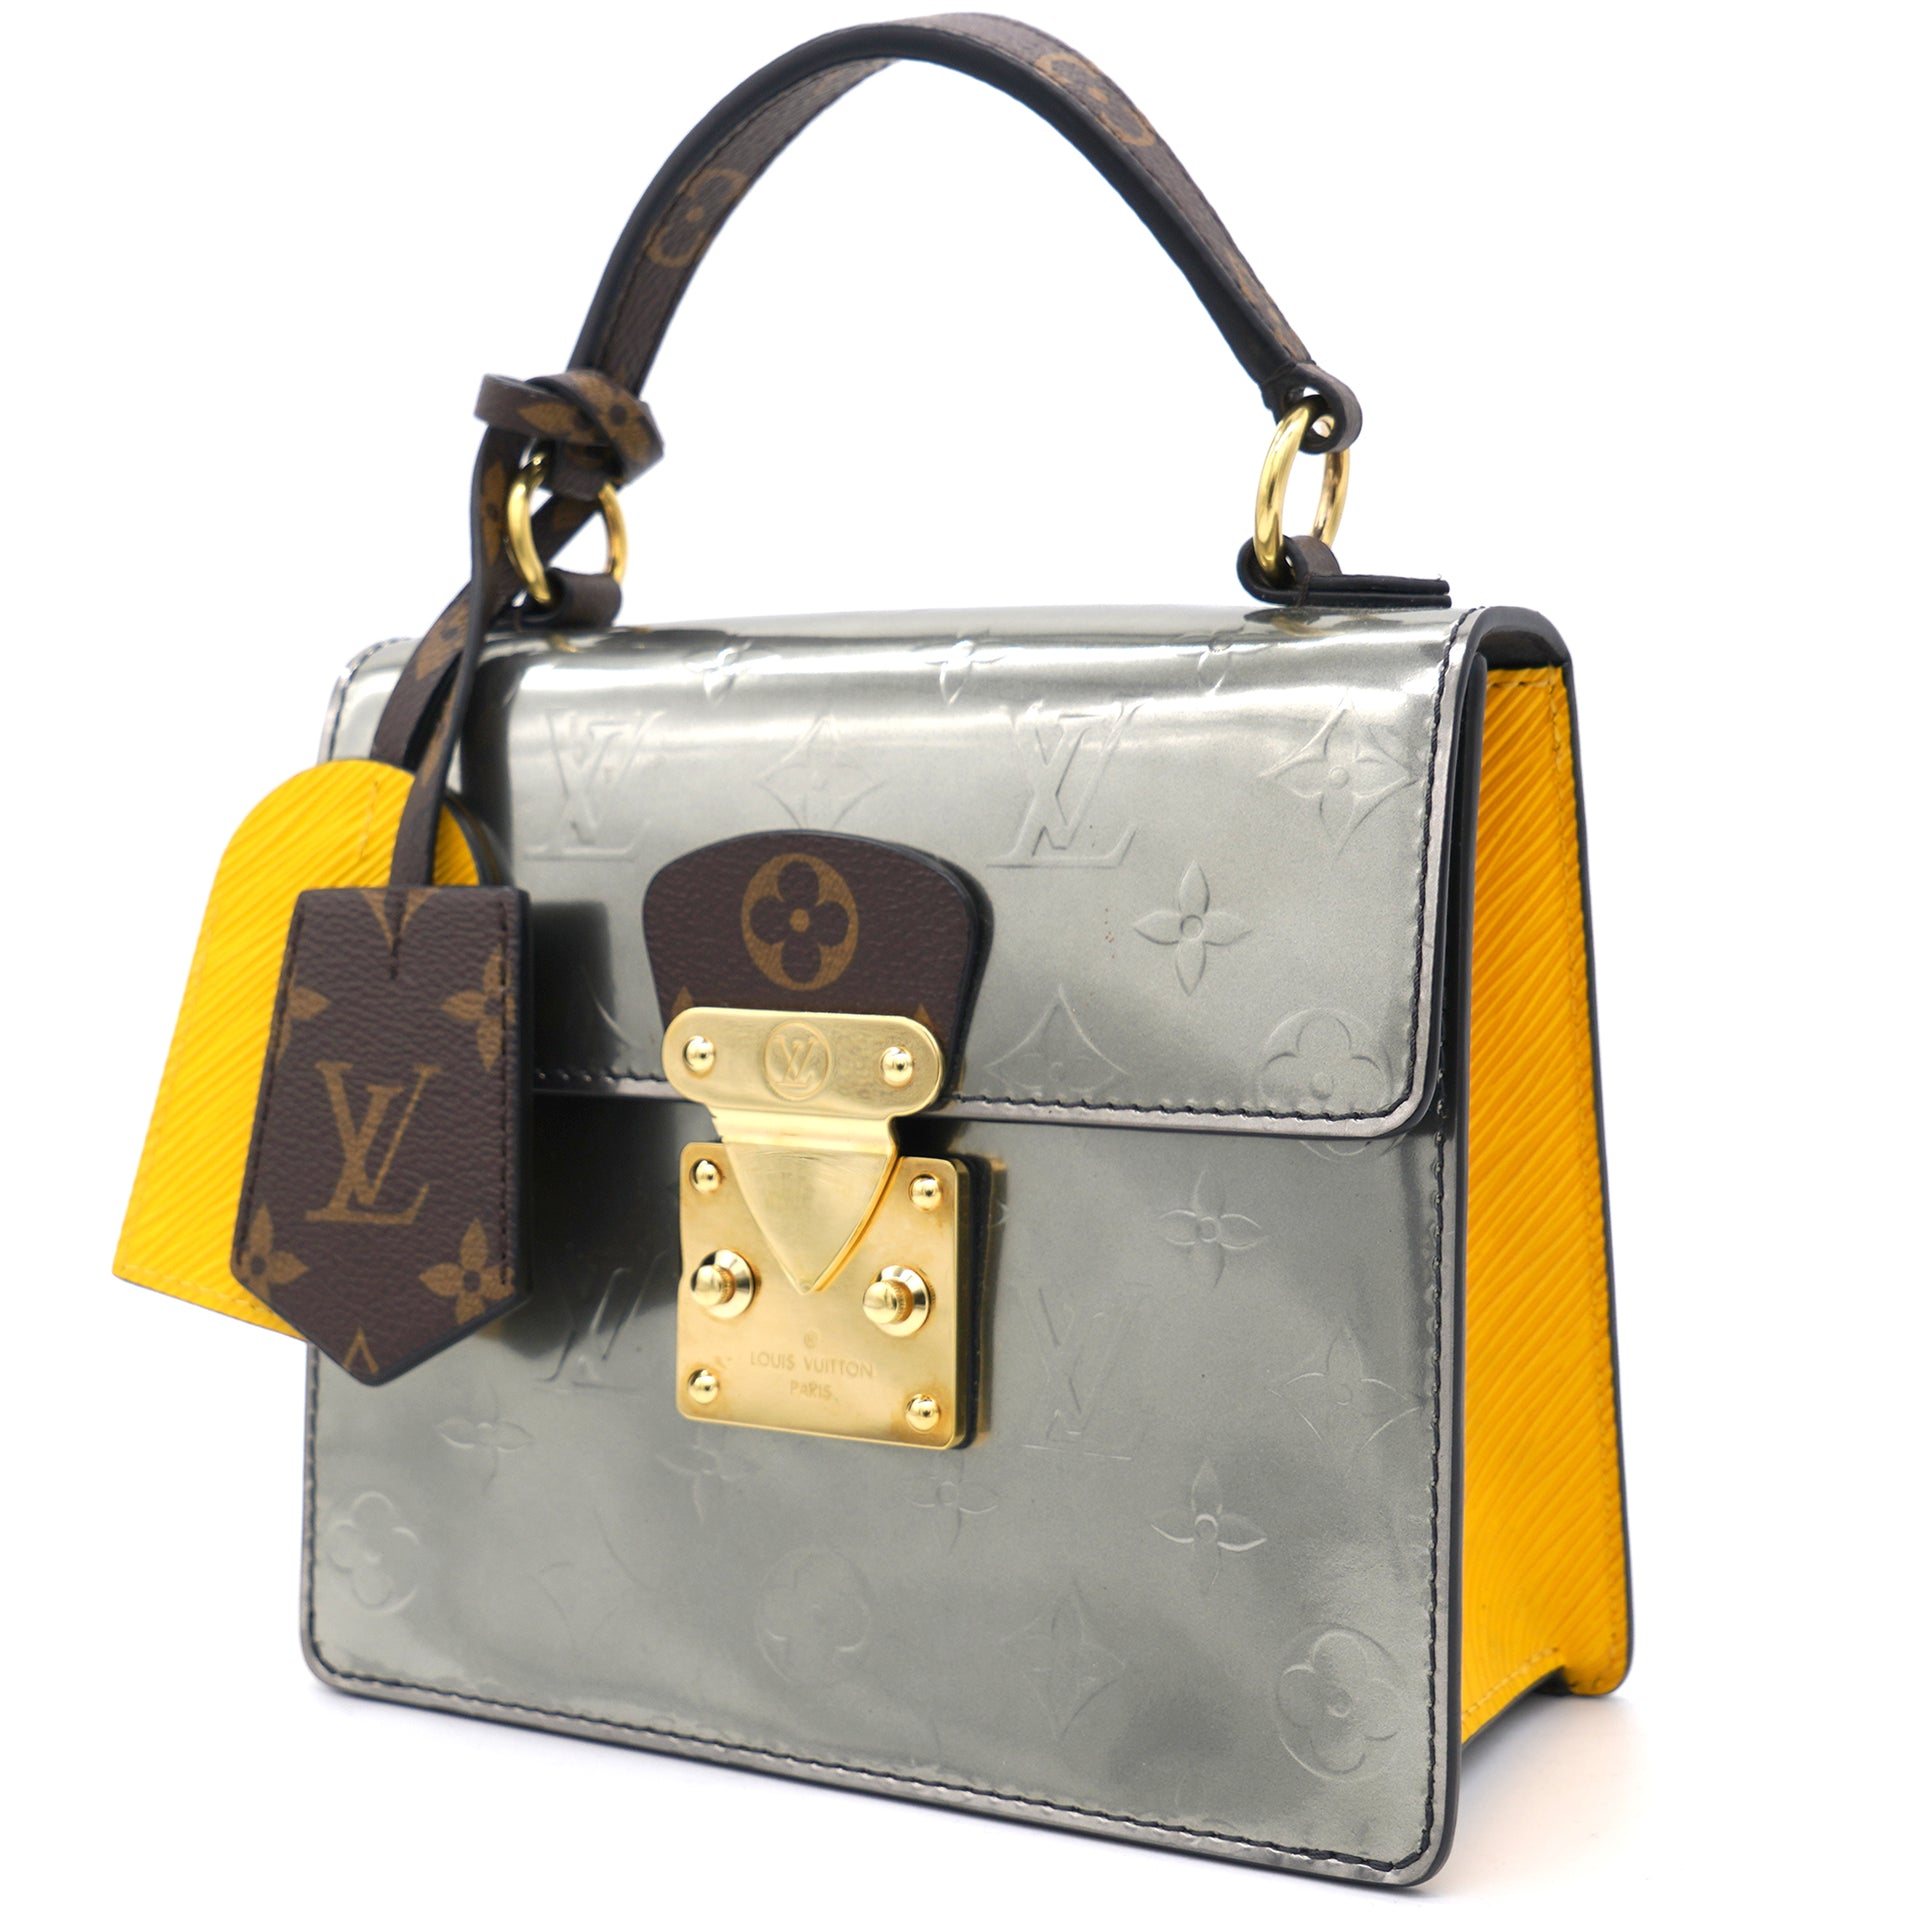 Auth LOUIS VUITTON Spring Street Baby yellow Vernis hand bag